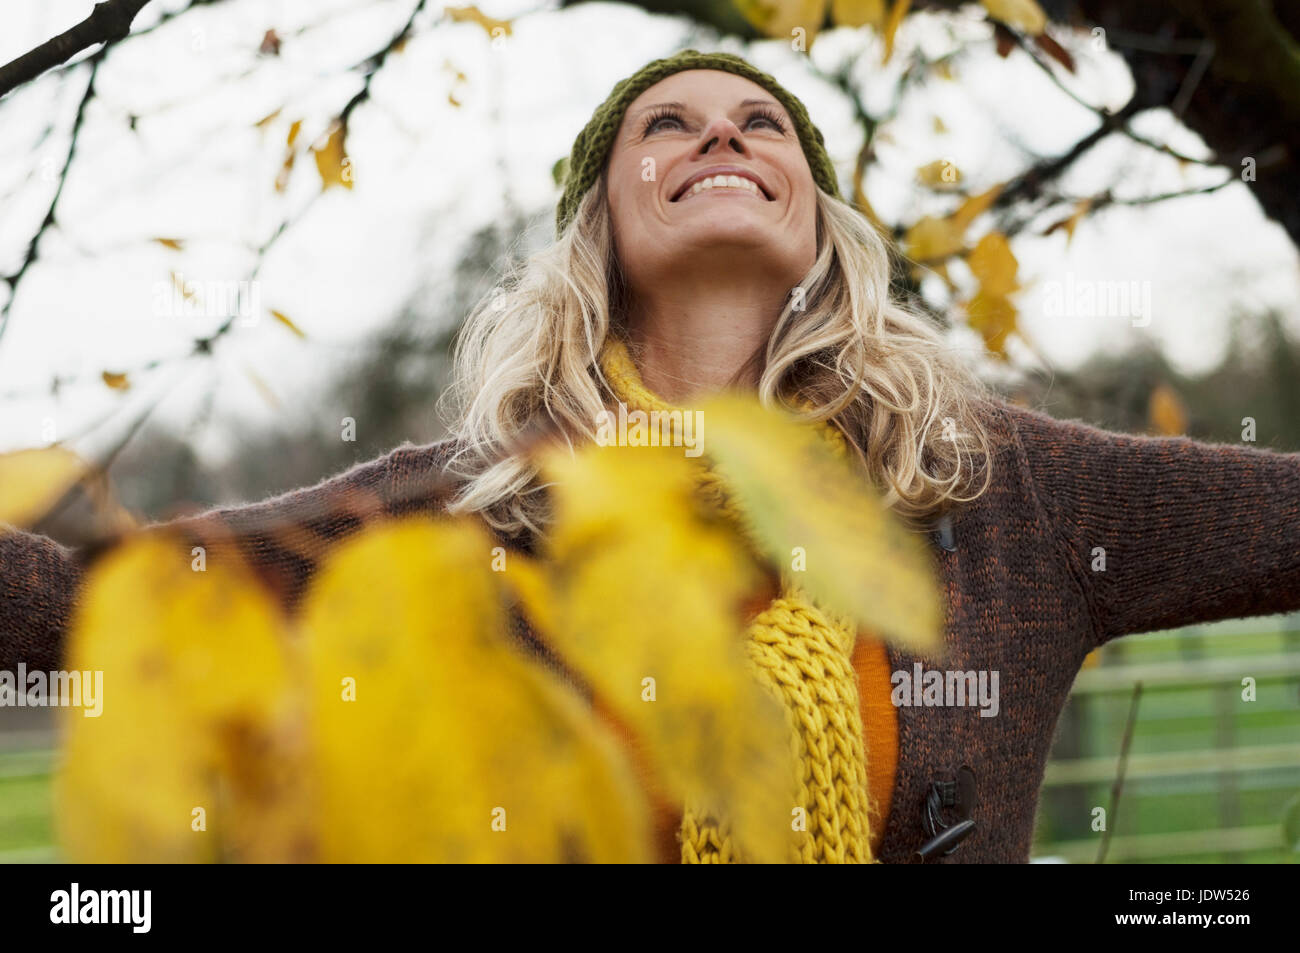 Mature woman looking up at tree in autumn, smiling Stock Photo